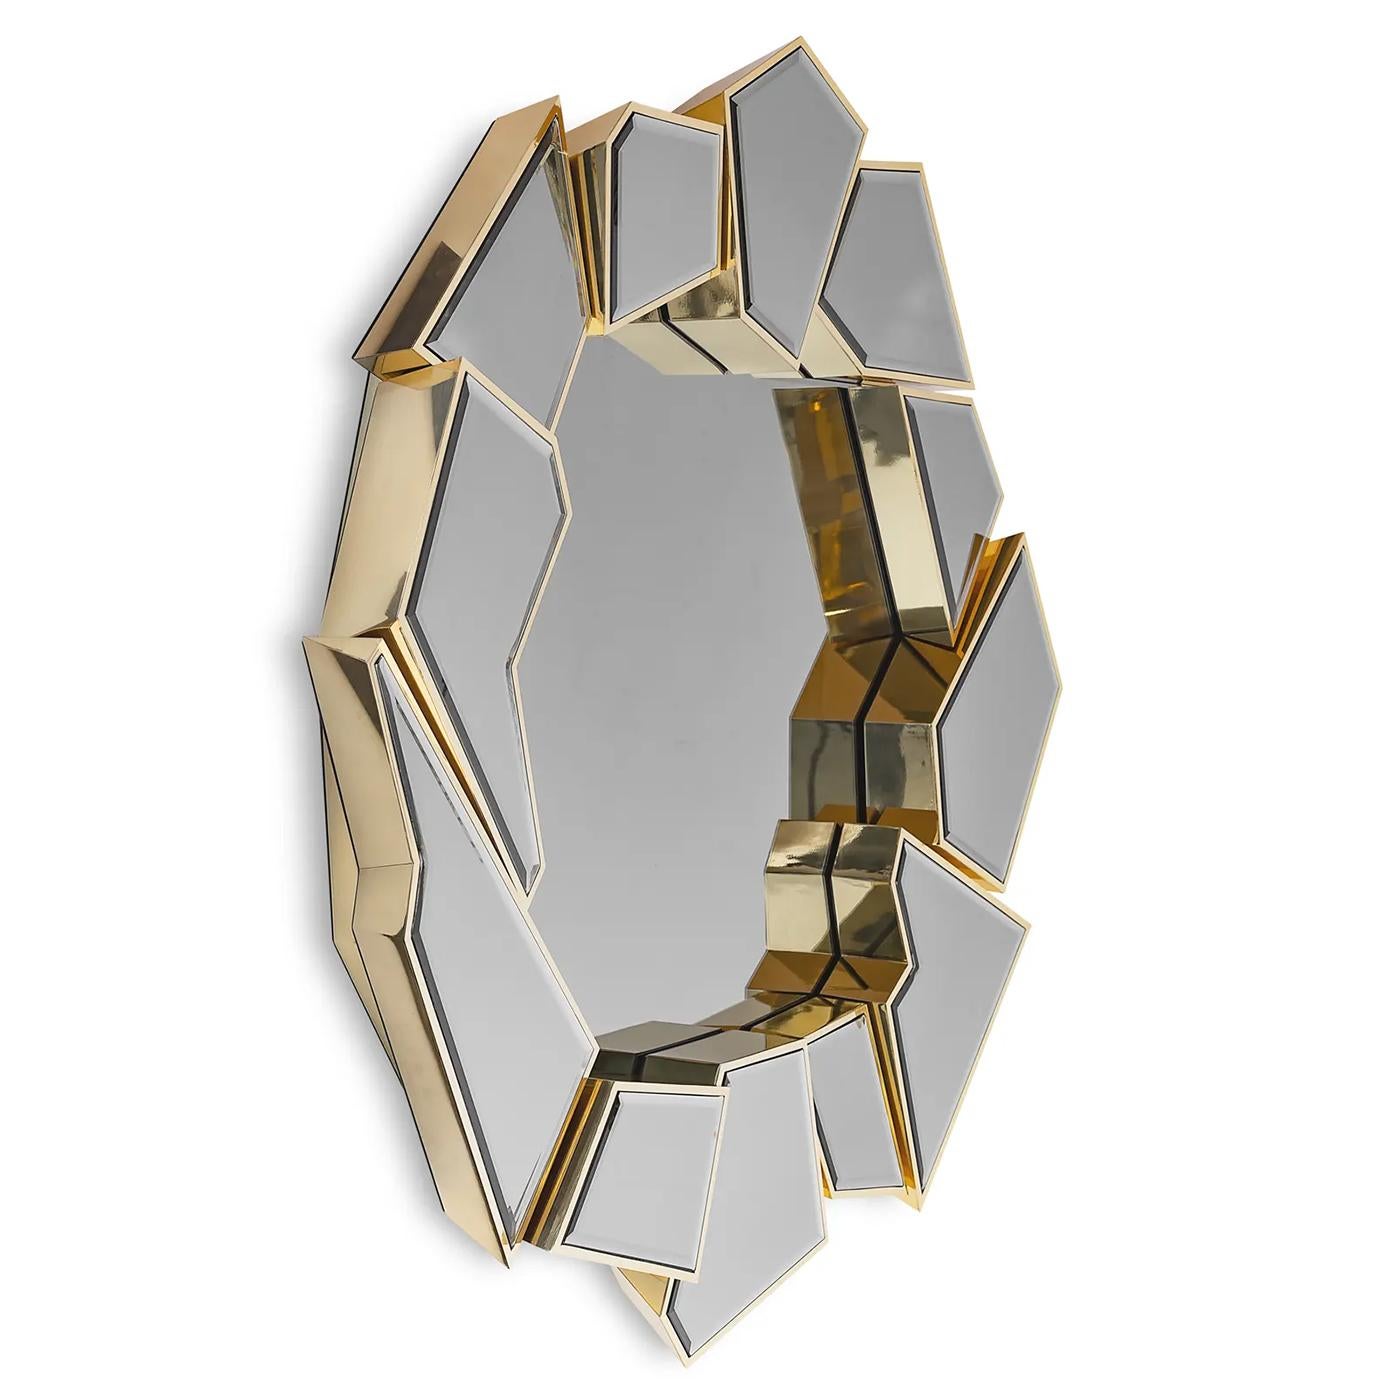 Mirror Livio Round with structure in solid brass in polished finish
with frame's mirrors and center mirror in bevelled smocked glass.